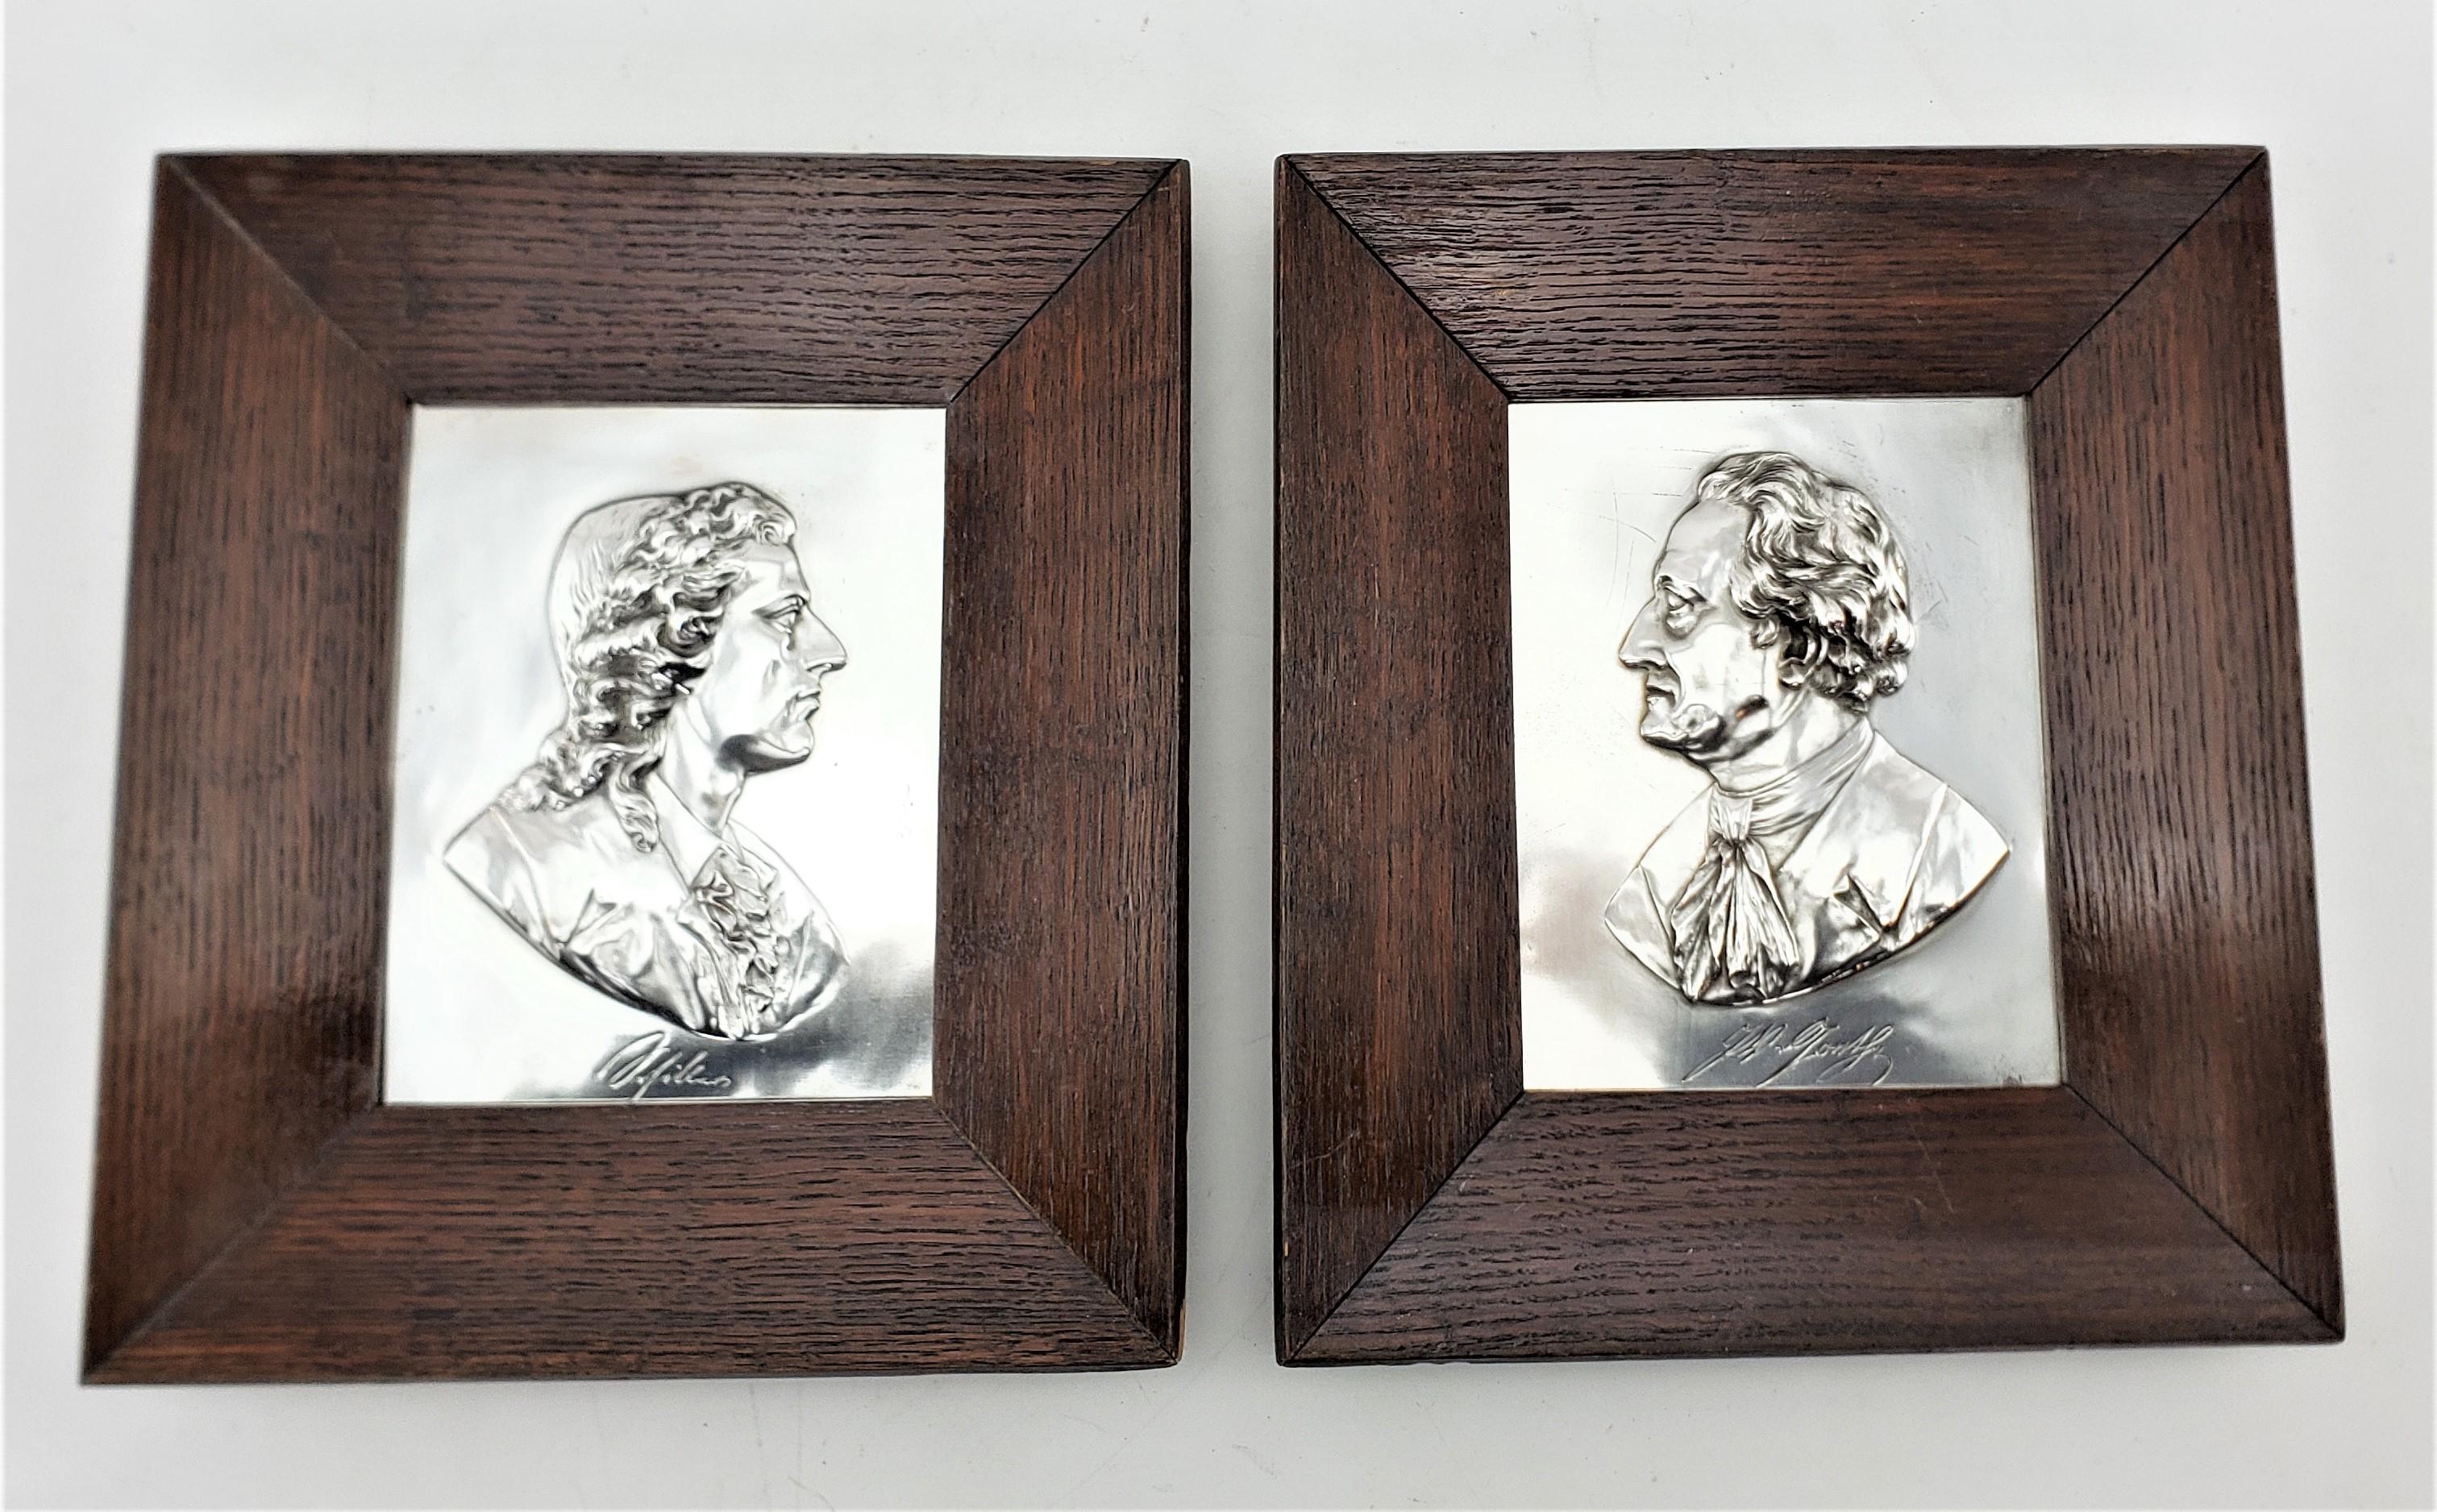 This pair of antique wall plaques are possibly signed by an unknown artist, or identify the respective individuals in both, and are presumed to originate from England and date to approximately 1880 and done in the period Victorian style. The wall